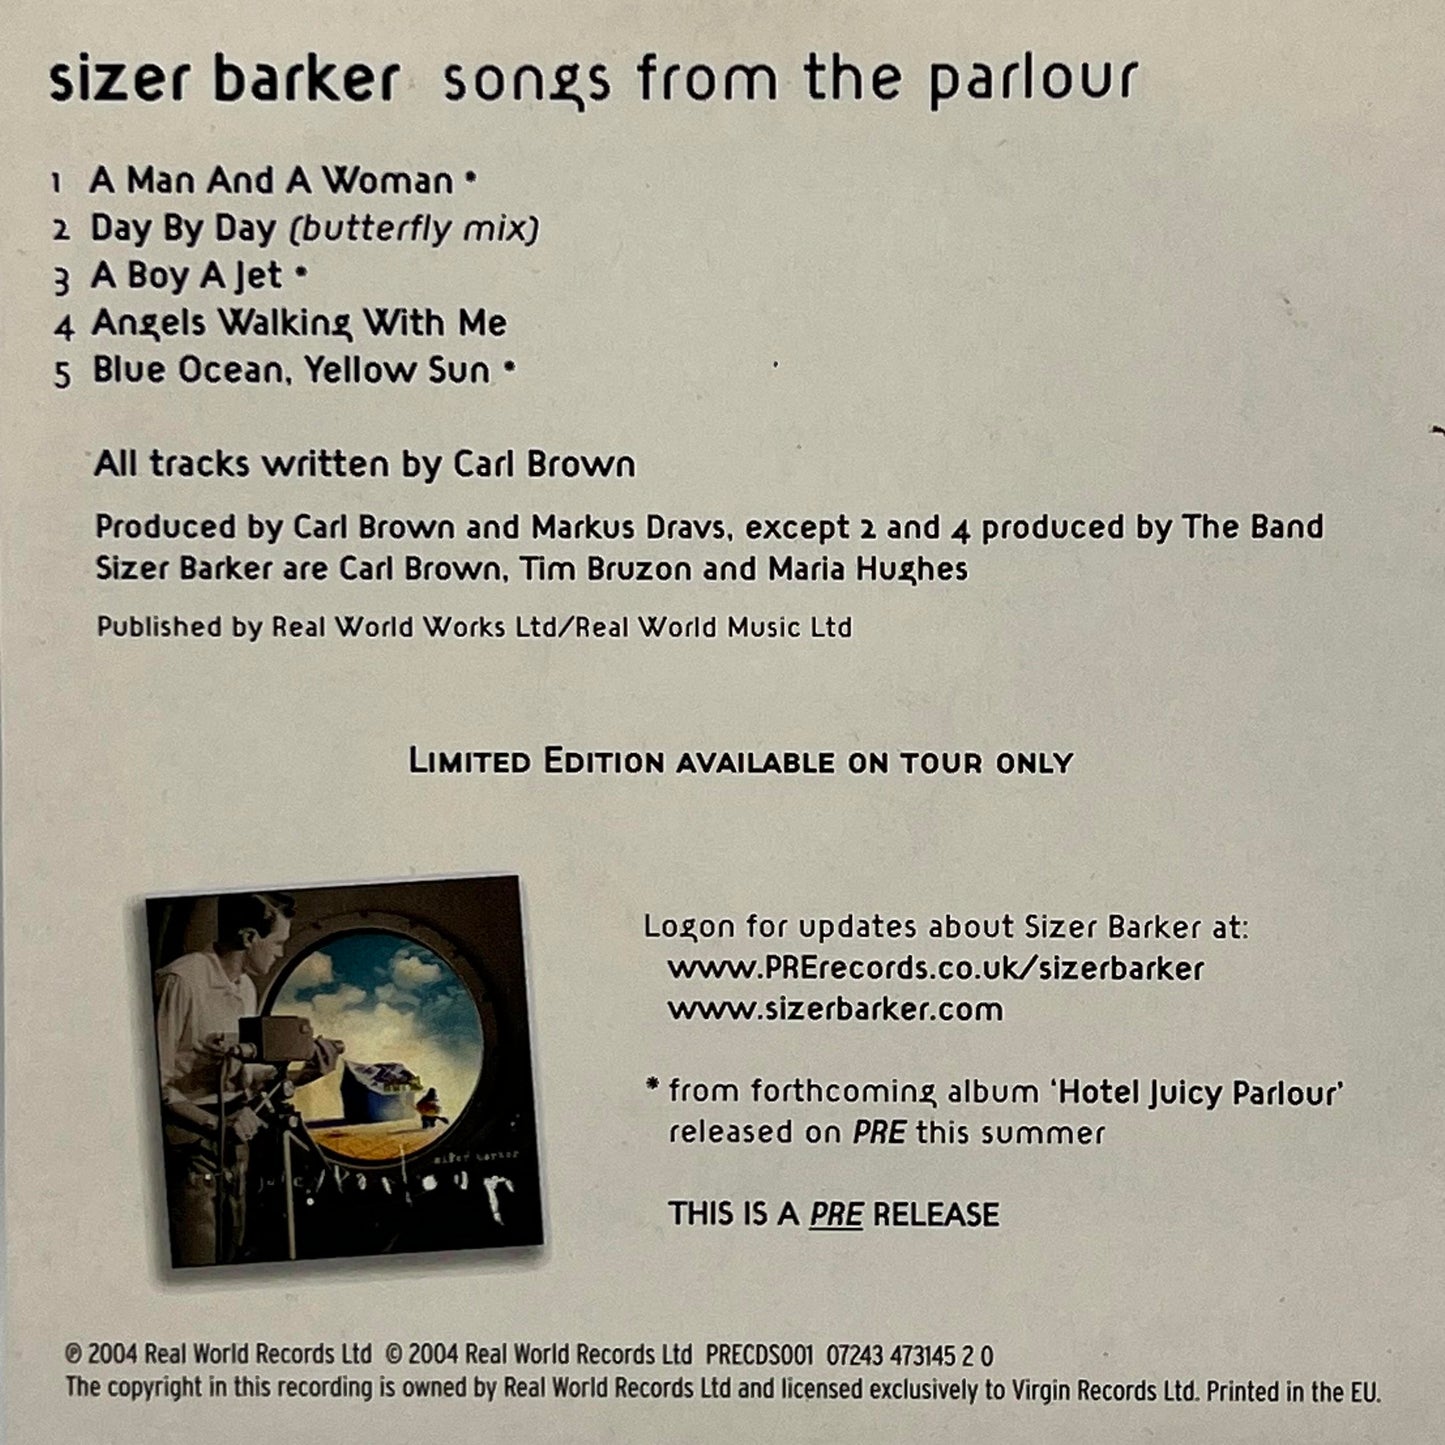 Sizer Barker - Songs From The Parlour (Limited Edition CD)